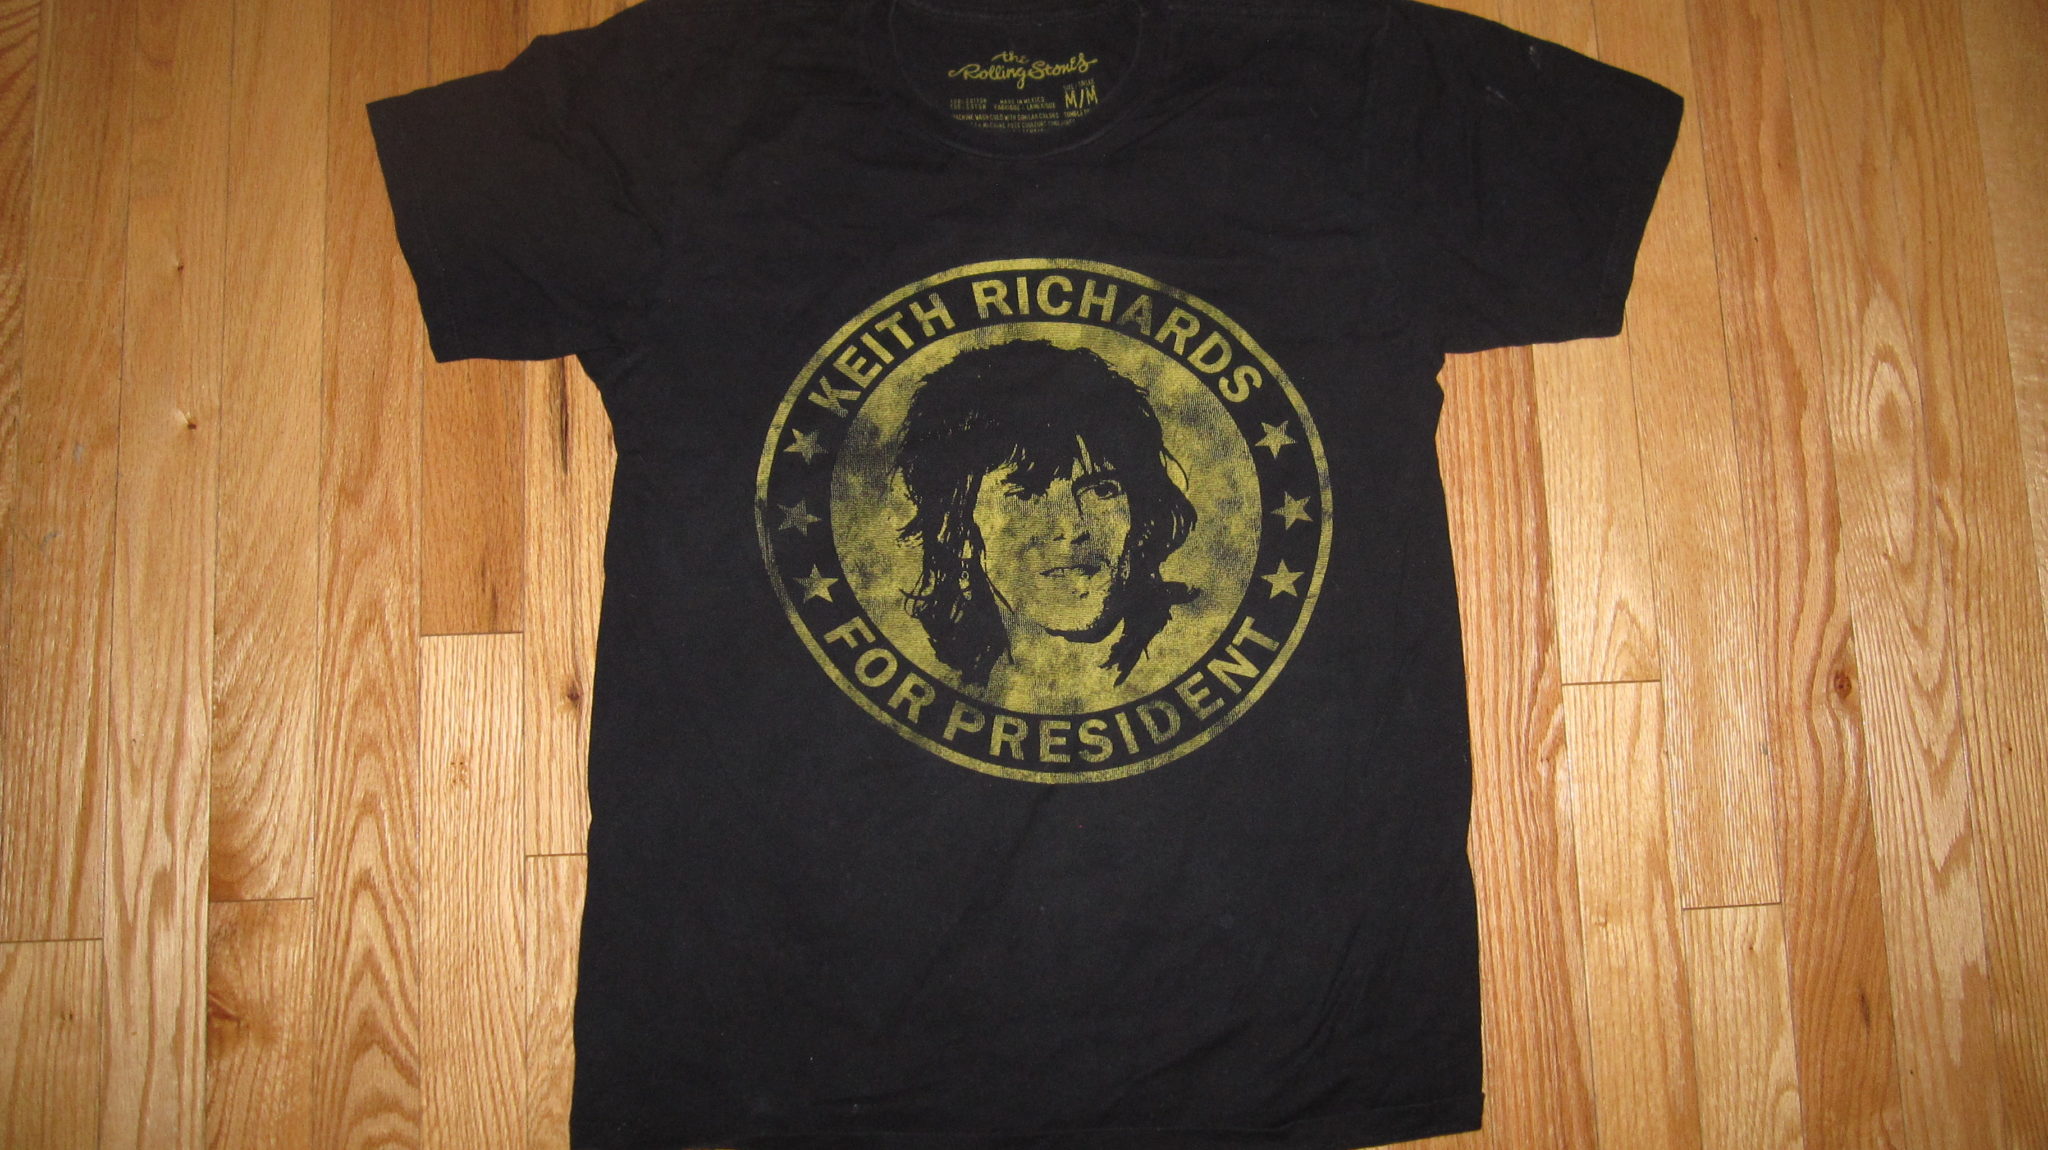 RICHARDS, KEITH FOR PRES T-SHIRT M - Record Collectors Paradise